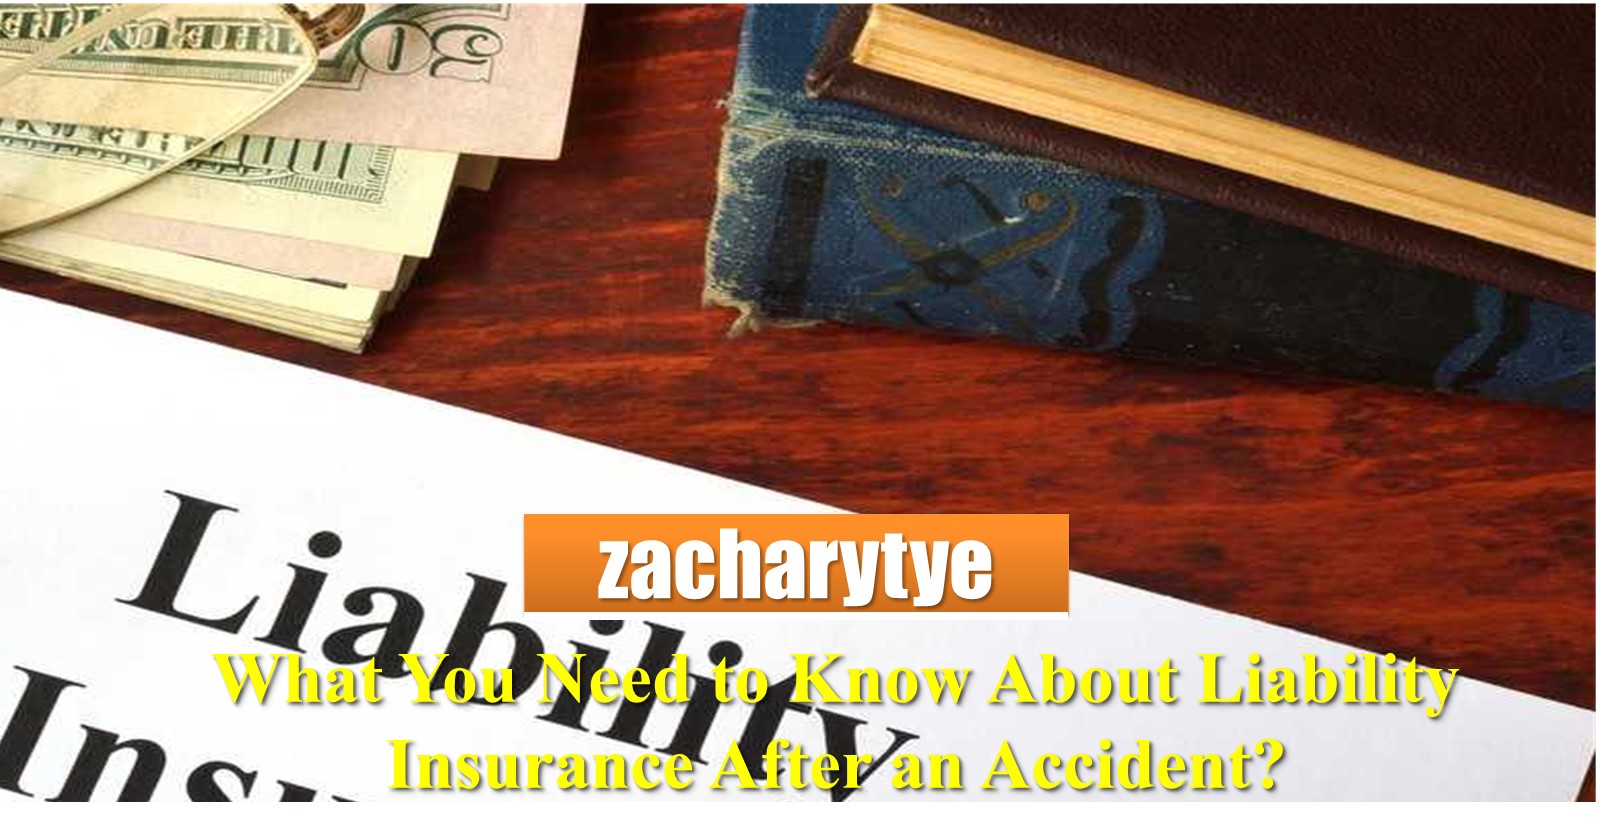 What You Need to Know About Liability Insurance After an Accident?